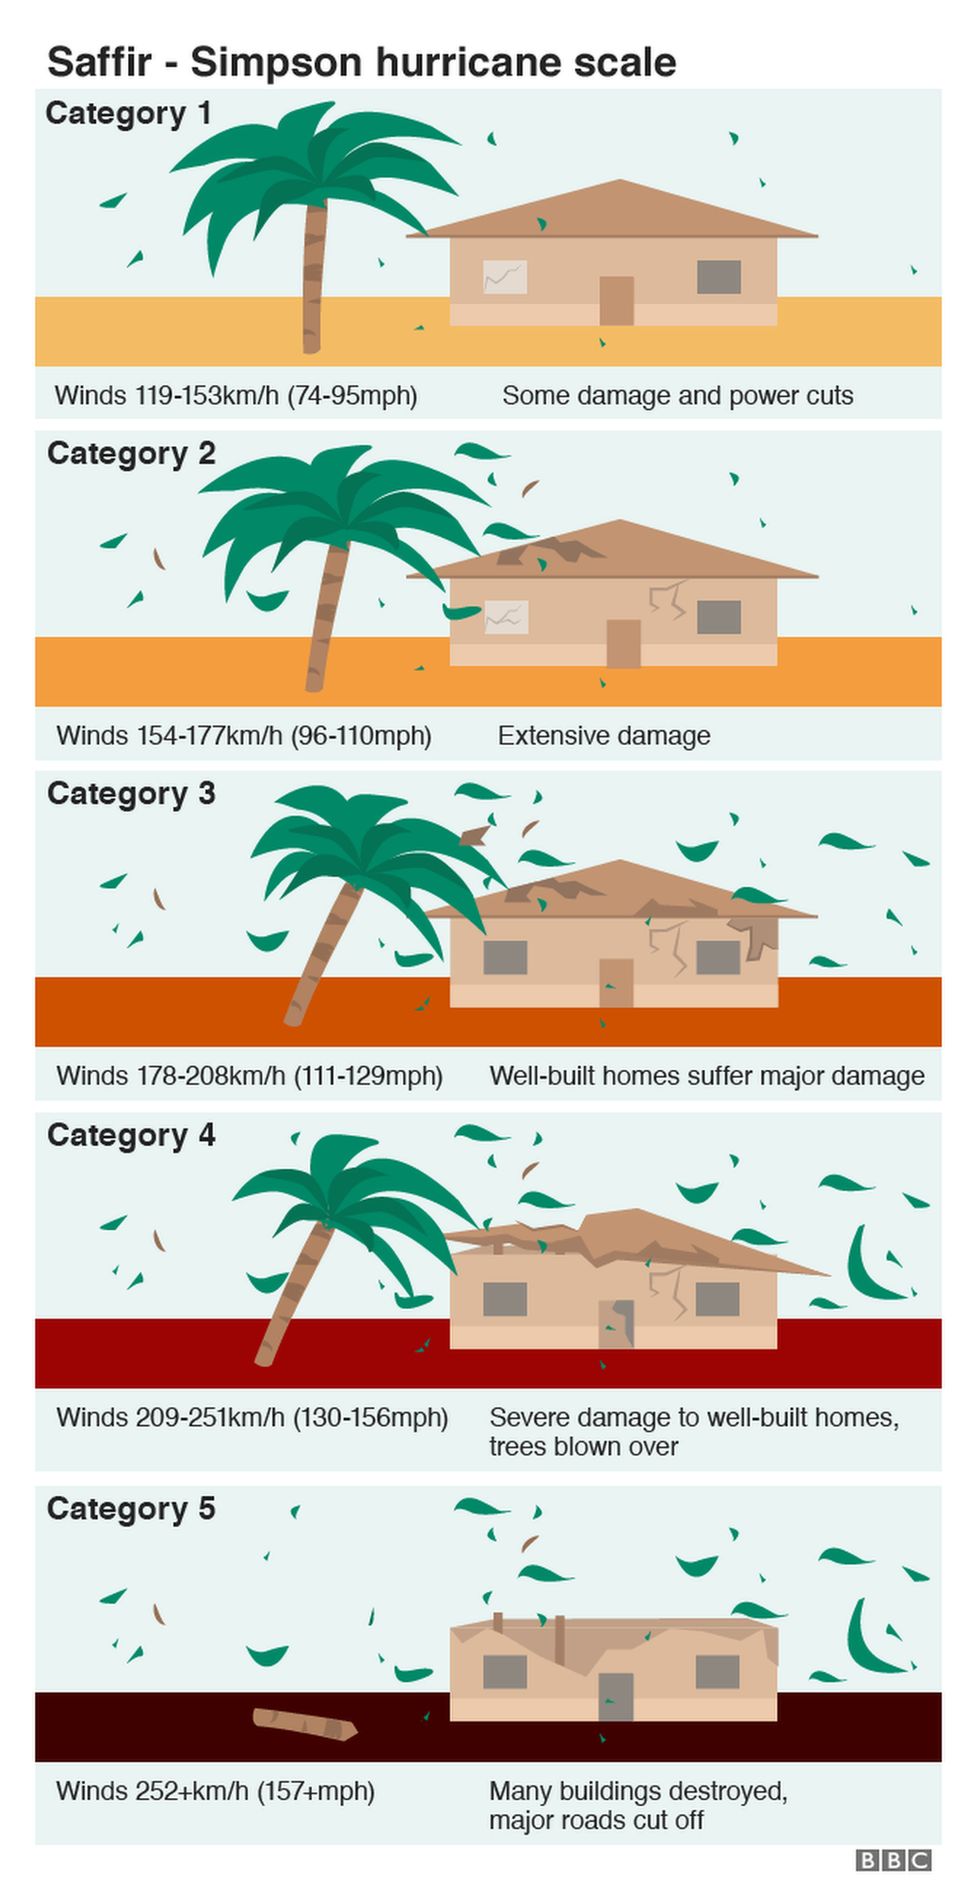 The Saffir Simpson hurricane scale in graphics